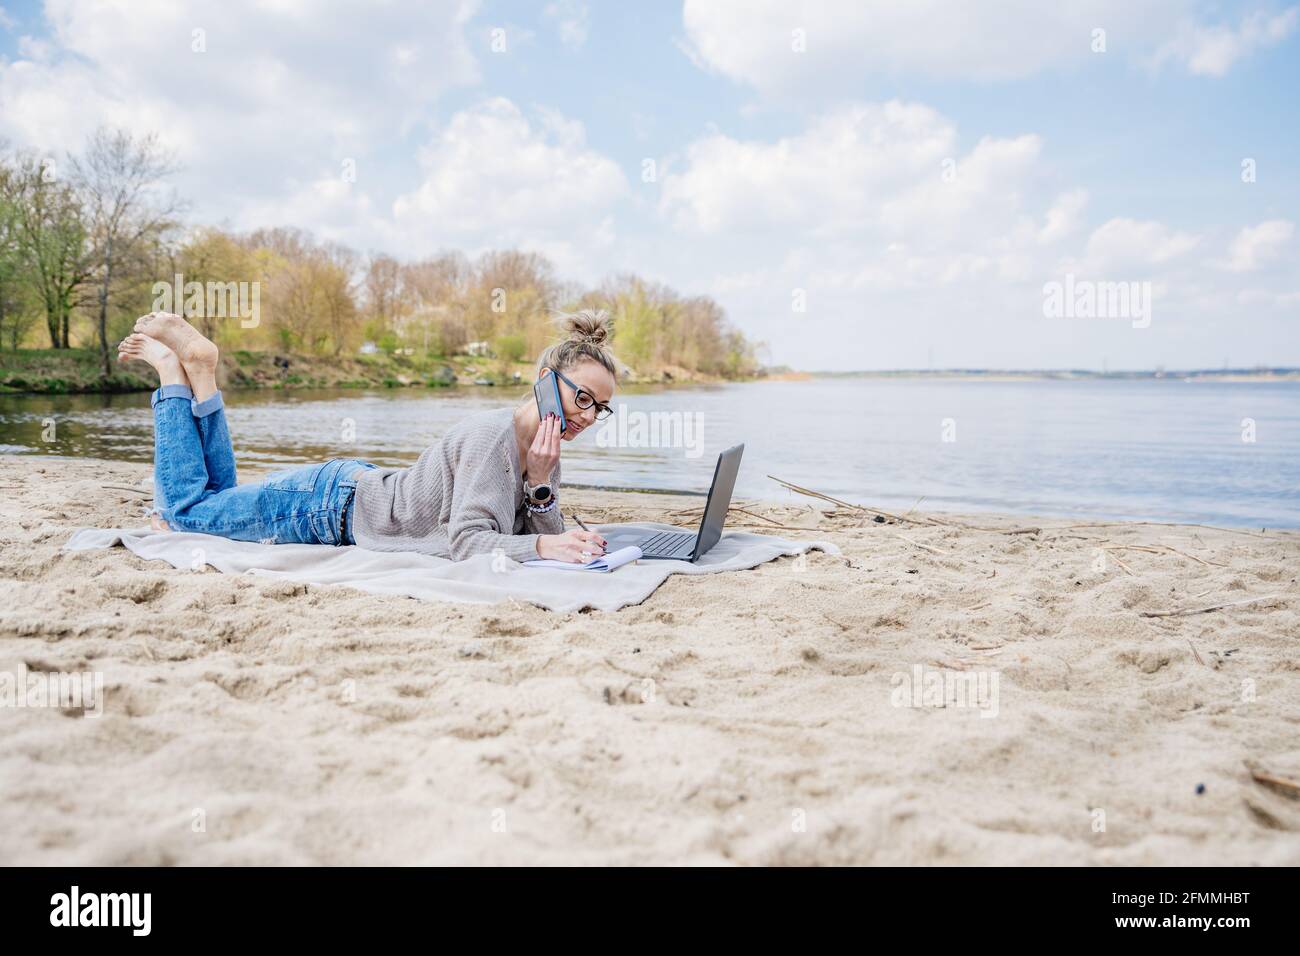 Woman works outdoors on laptop. She's lying on the beach on a blanket and talking on the phone with klient. Stock Photo